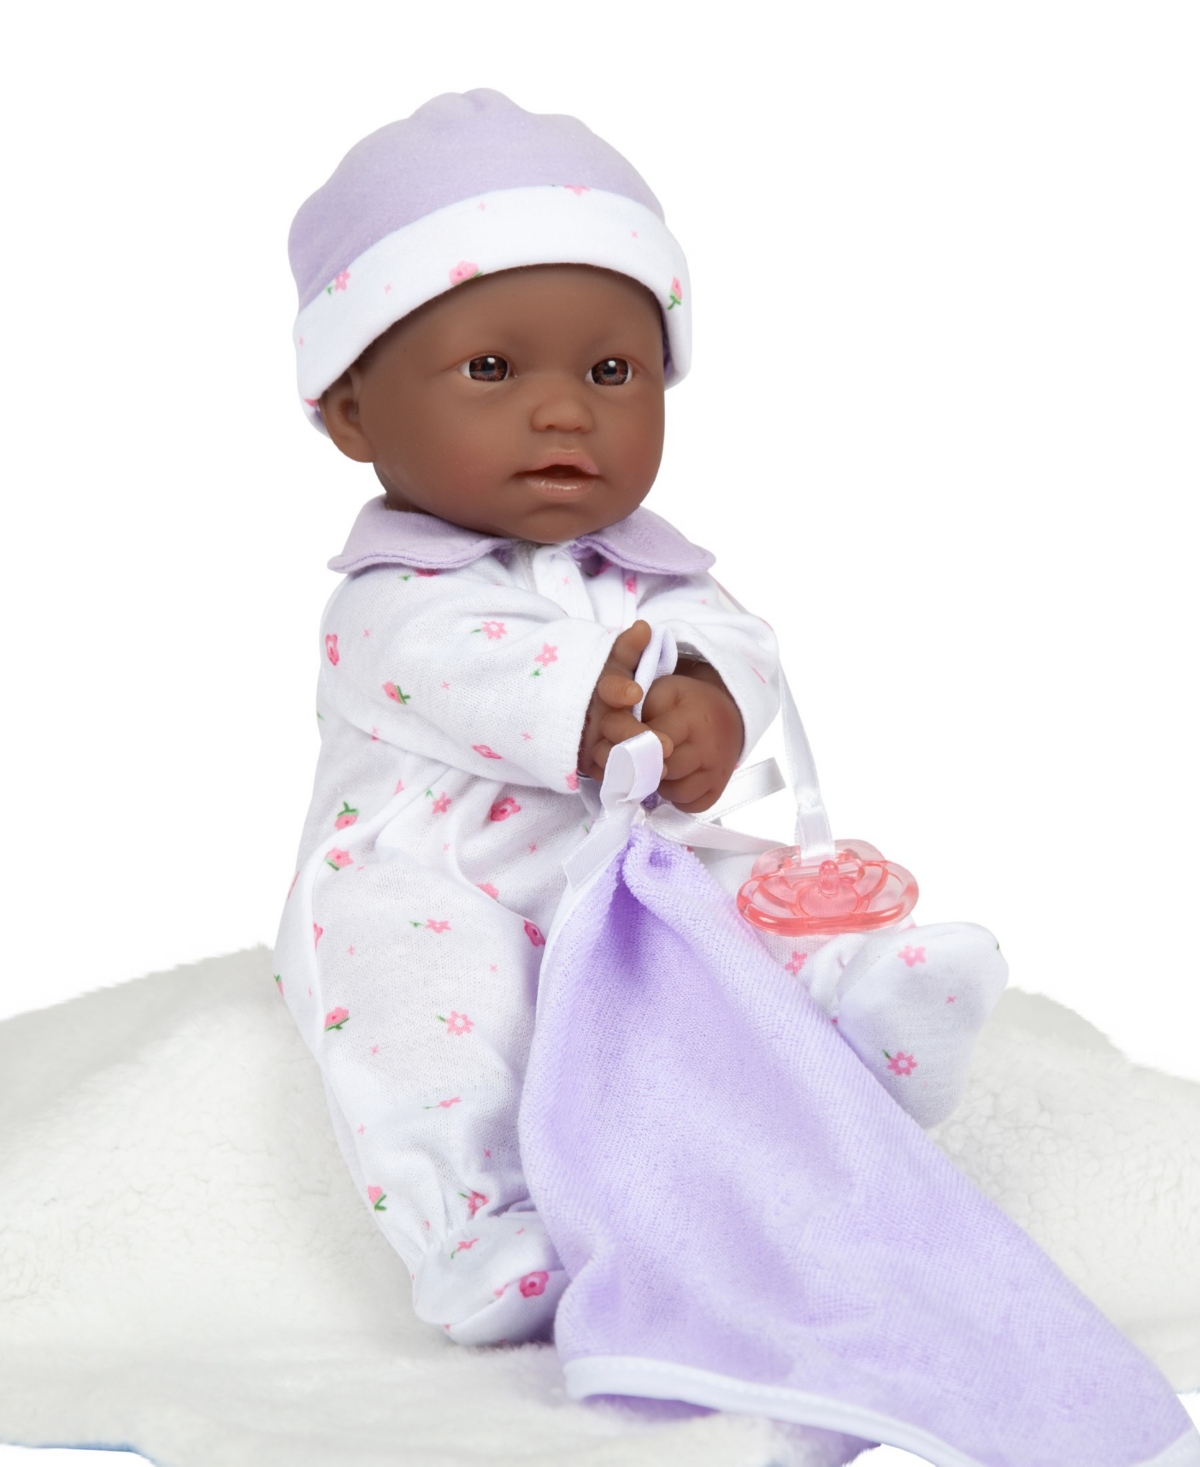 Shop Jc Toys La Baby African American 11" Soft Body Baby Doll Purple Outfit In African American - Purple